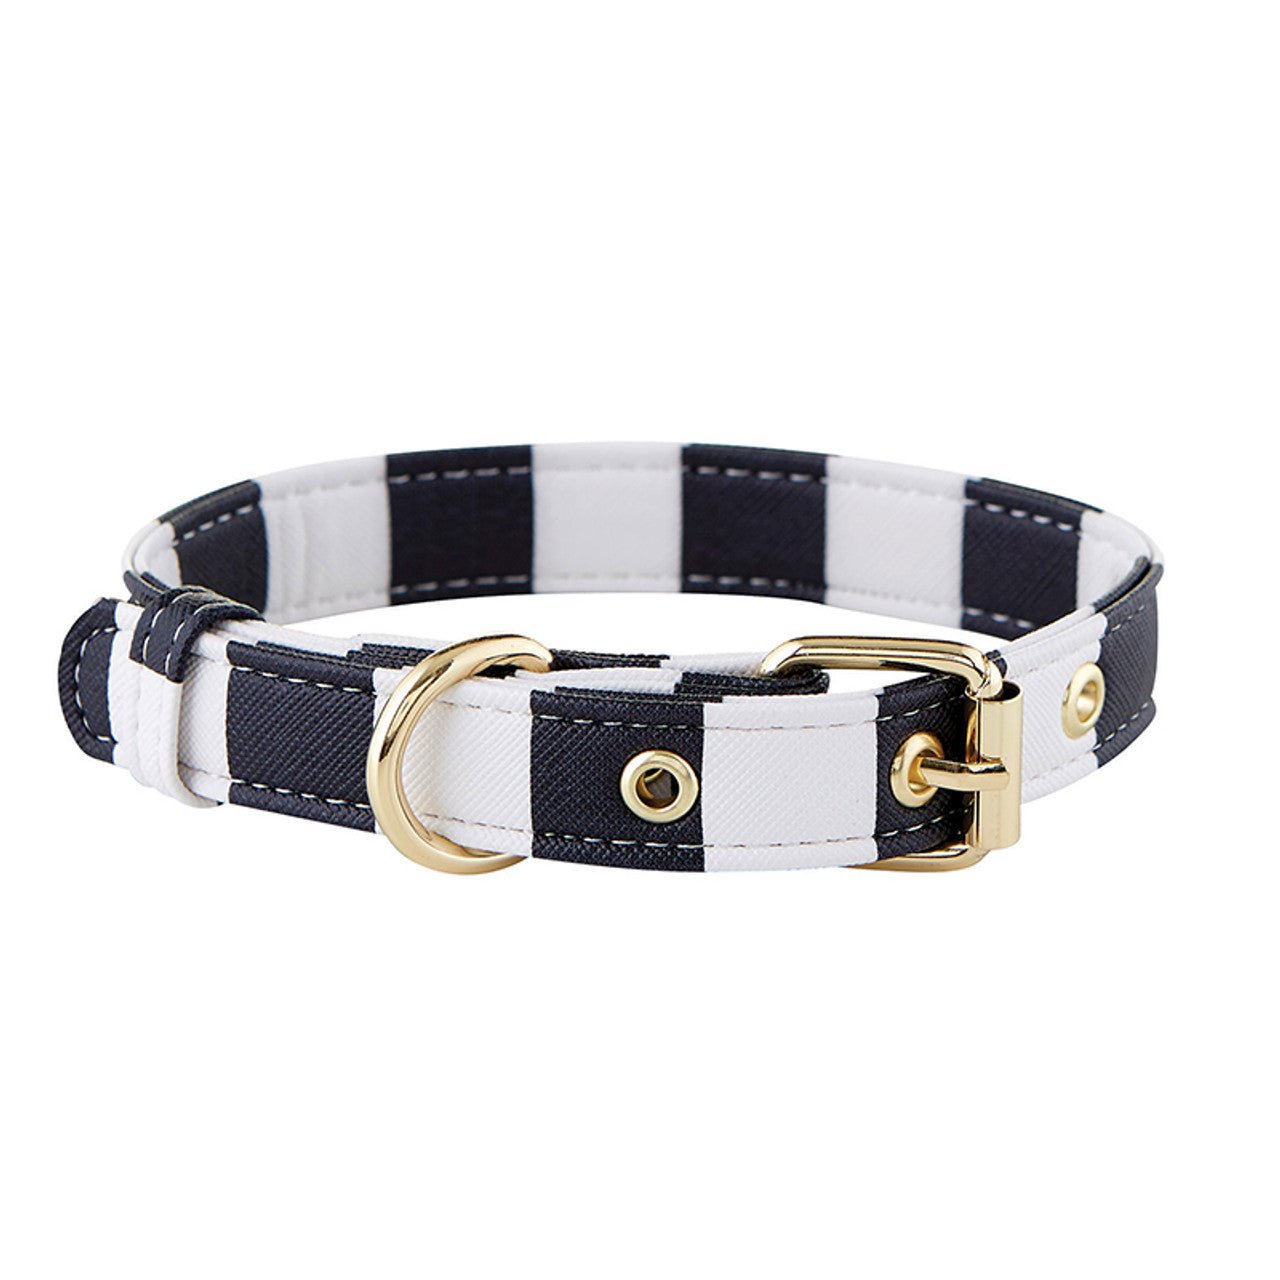 Dog Collar and Leash in Cabana Black and White Stripes | Faux Saffiano Leather